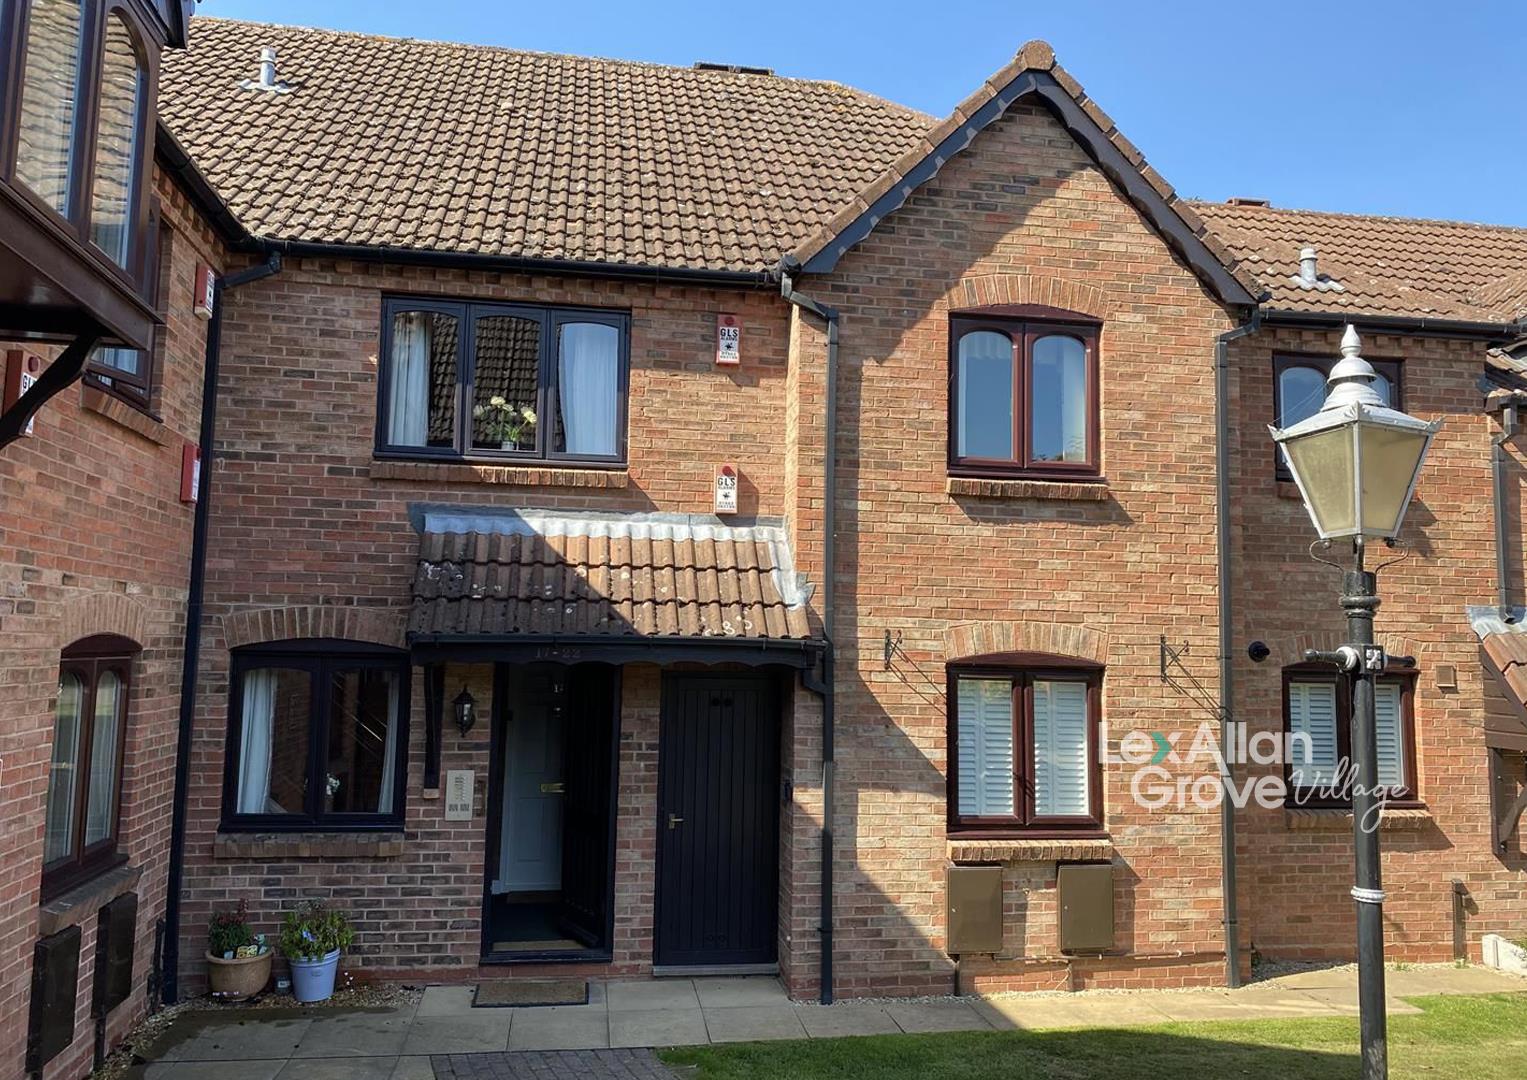 2 bed  for sale in Woodfield, Stourbridge, DY9 